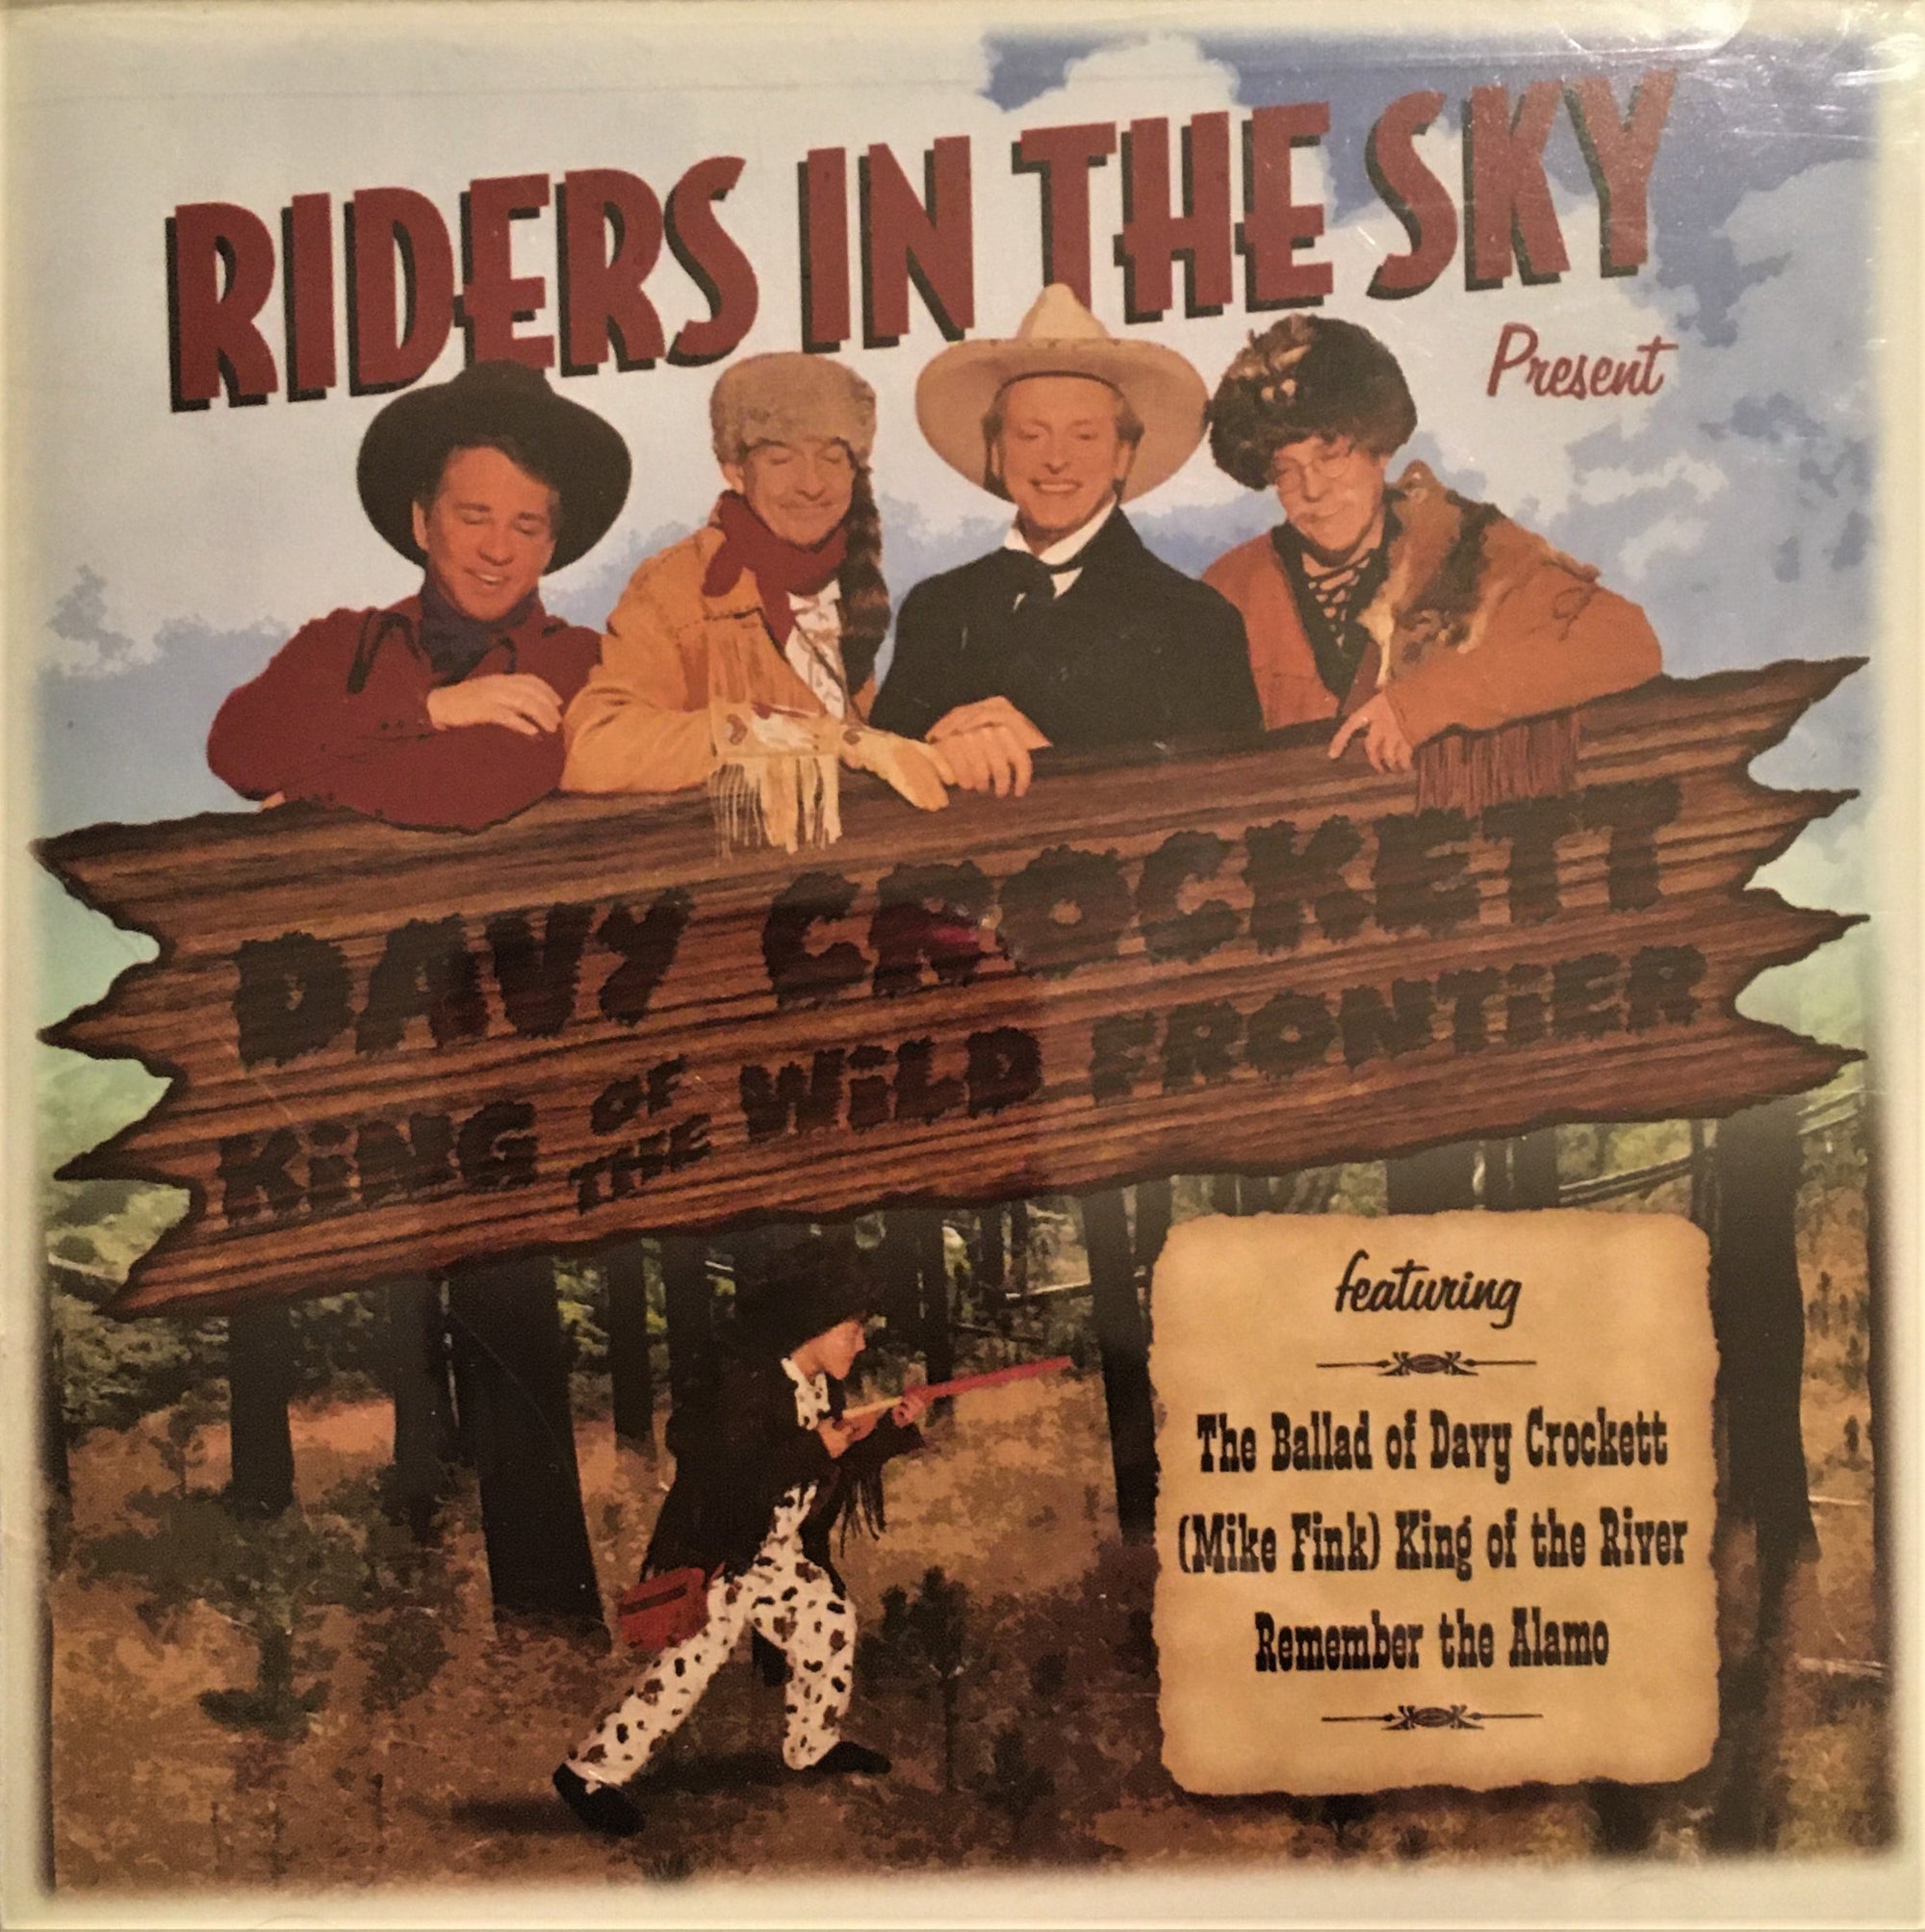 CD Davy Crockett King of the Wild Frontier by Riders in the Sky